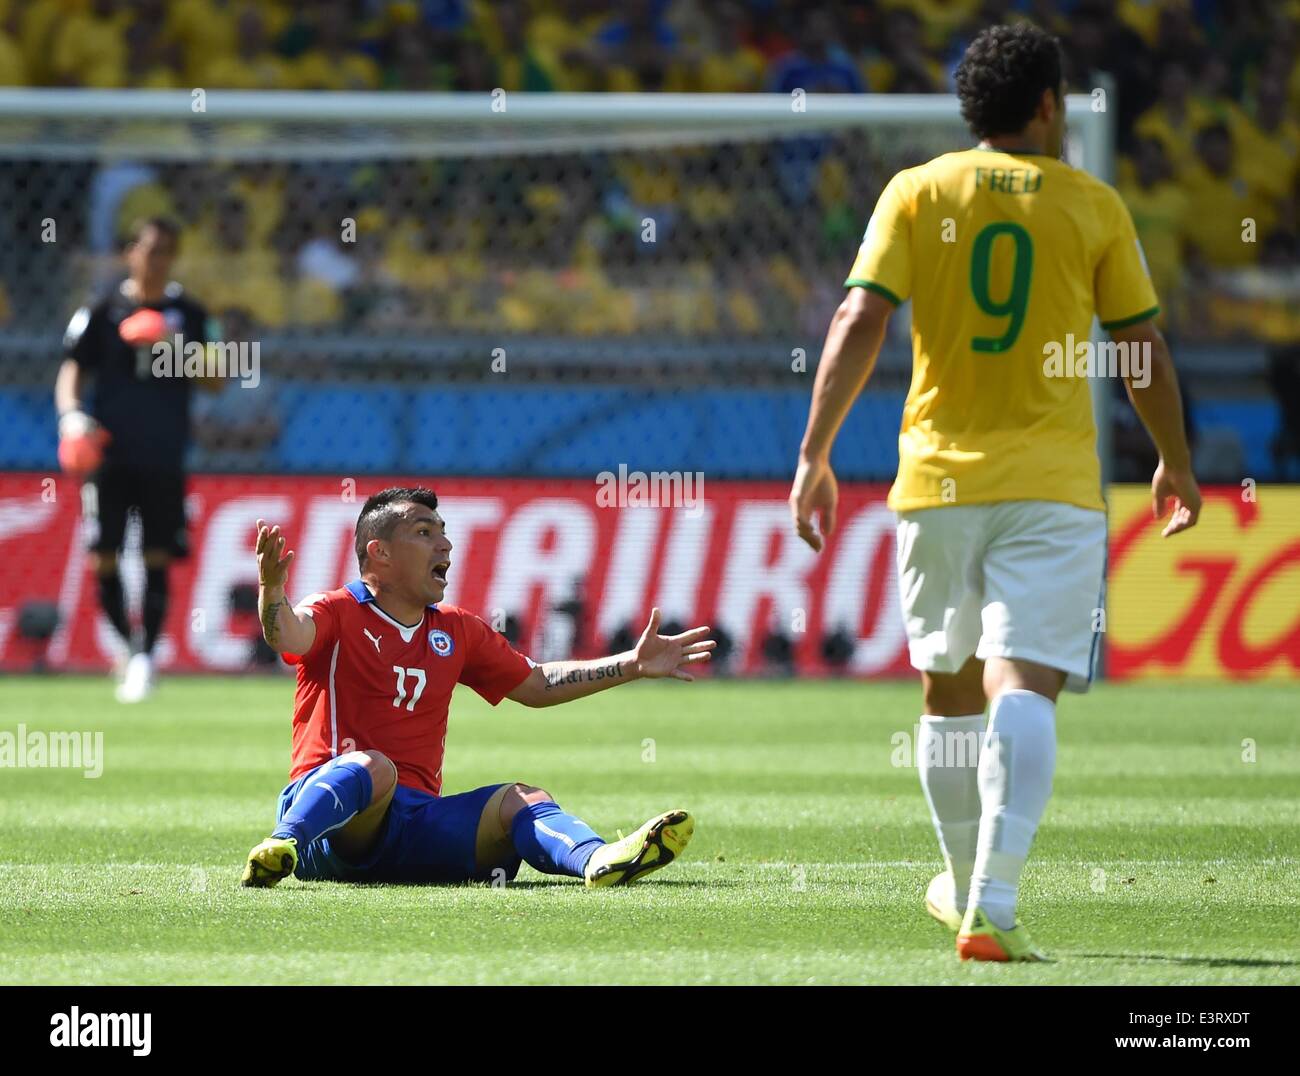 Belo Horizonte, Brazil. 28th June, 2014. Chile's Gary Medel reacts after falling down during a Round of 16 match between Brazil and Chile of 2014 FIFA World Cup at the Estadio Mineirao Stadium in Belo Horizonte, Brazil, on June 28, 2014. Credit:  Liu Dawei/Xinhua/Alamy Live News Stock Photo